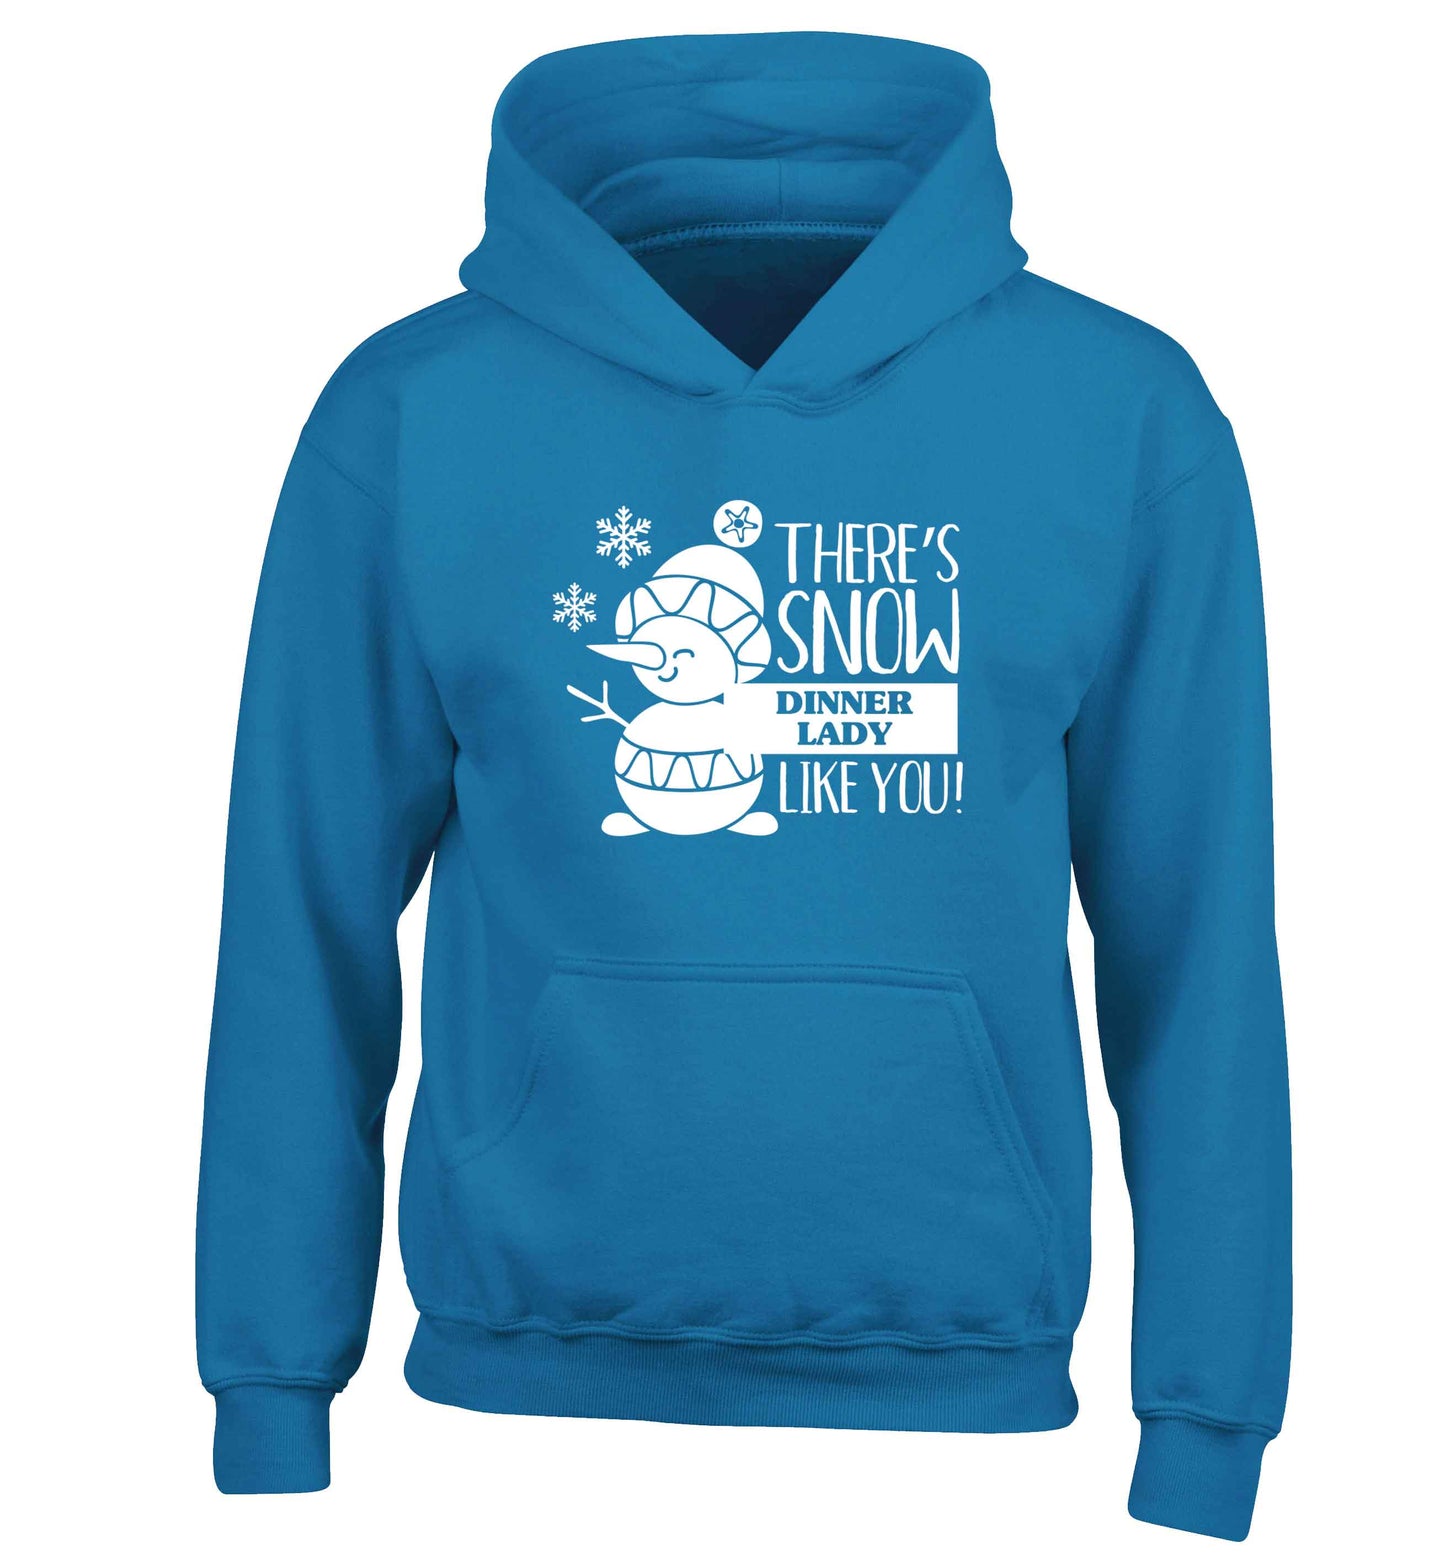 There's snow dinner lady like you children's blue hoodie 12-13 Years